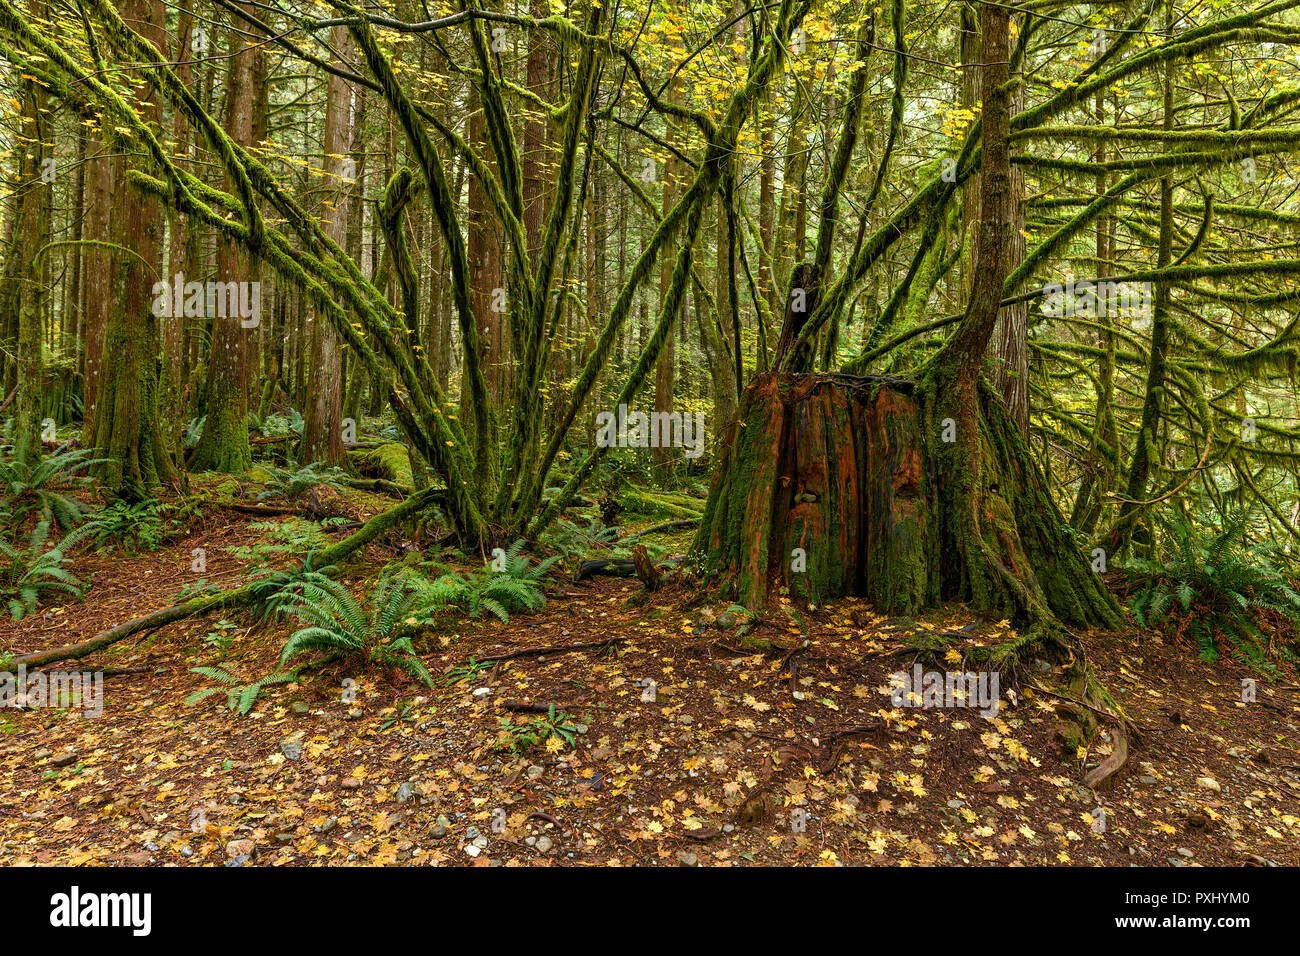 Lush vegetation and giant tree trunk in the Golden Ears Provincial Park, British Columbia, Canada Stock Photo